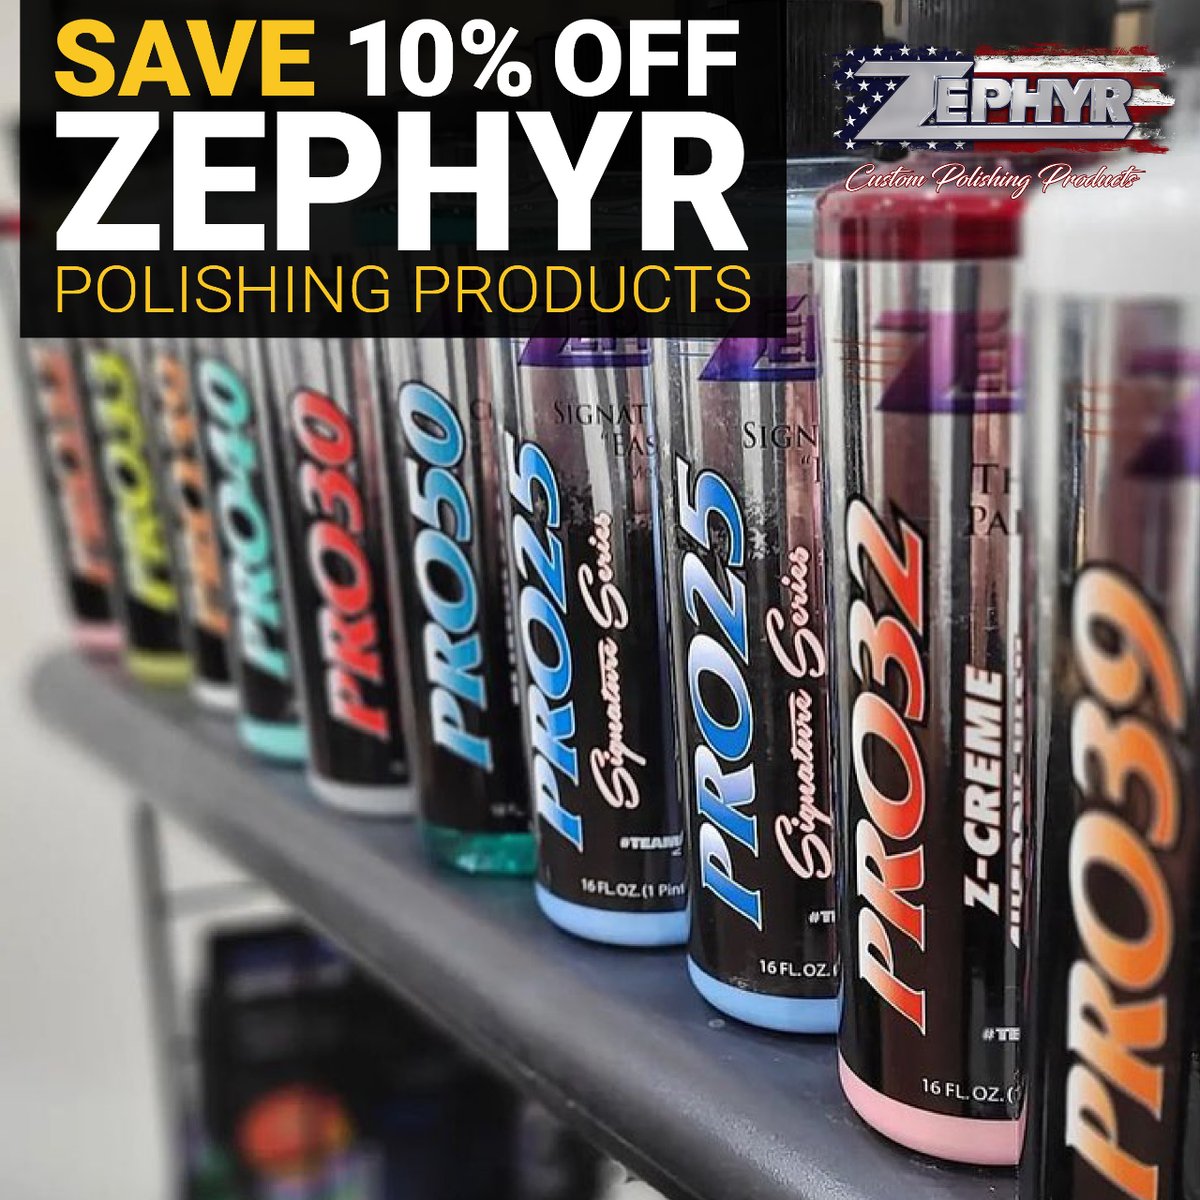 Get the best for your Spring cleaning & save! 🫧 Zephyr polishing products are 10% OFF this April:  4statetrucks.com/zephyr-sales-c… Ends 4/30 11:59 p.m. cst.  #4StateTrucks #ChromeShopMafia #chrome #chromeshop #semitrucks #trucking #truckers #zephyr